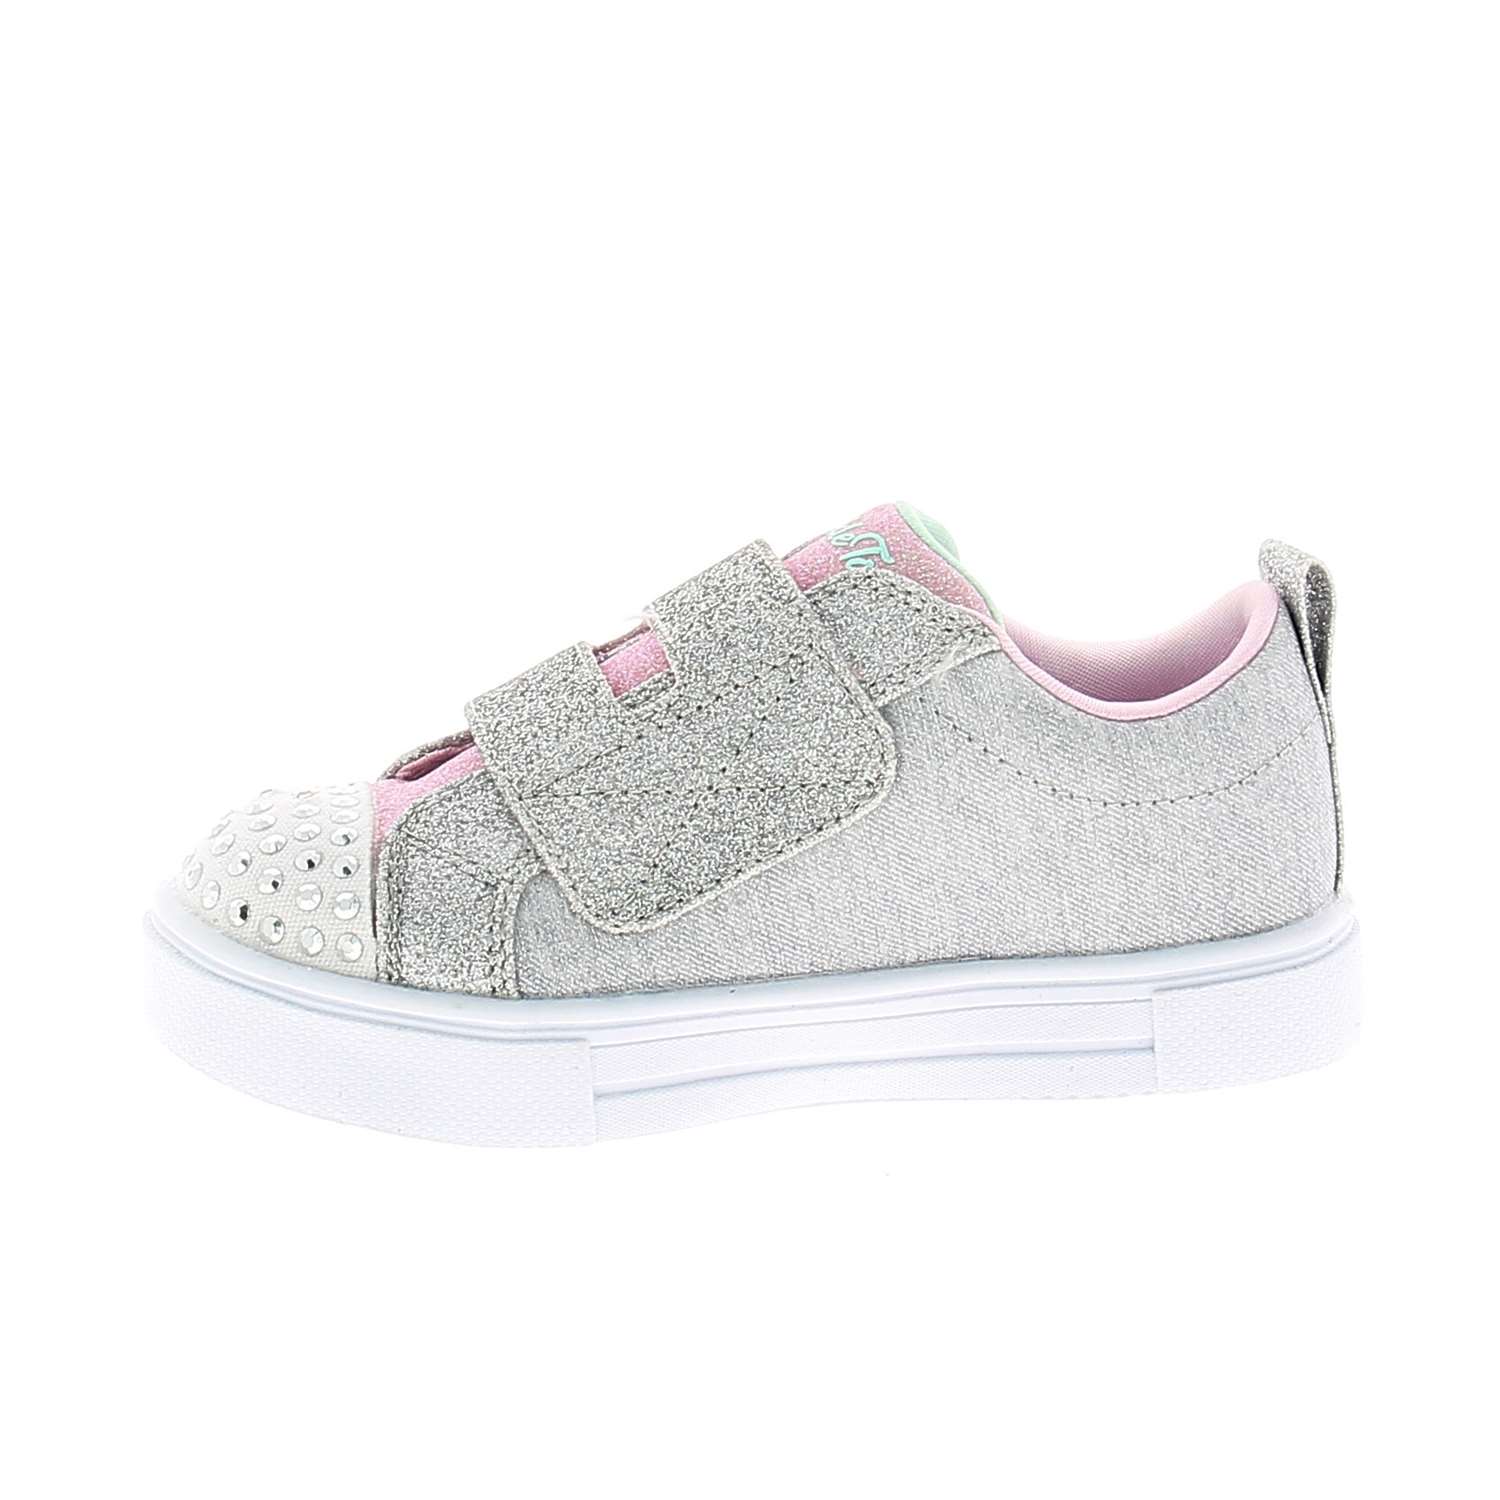 05 - TWINKLE TOES - SKECHERS - Baskets - Synthétique